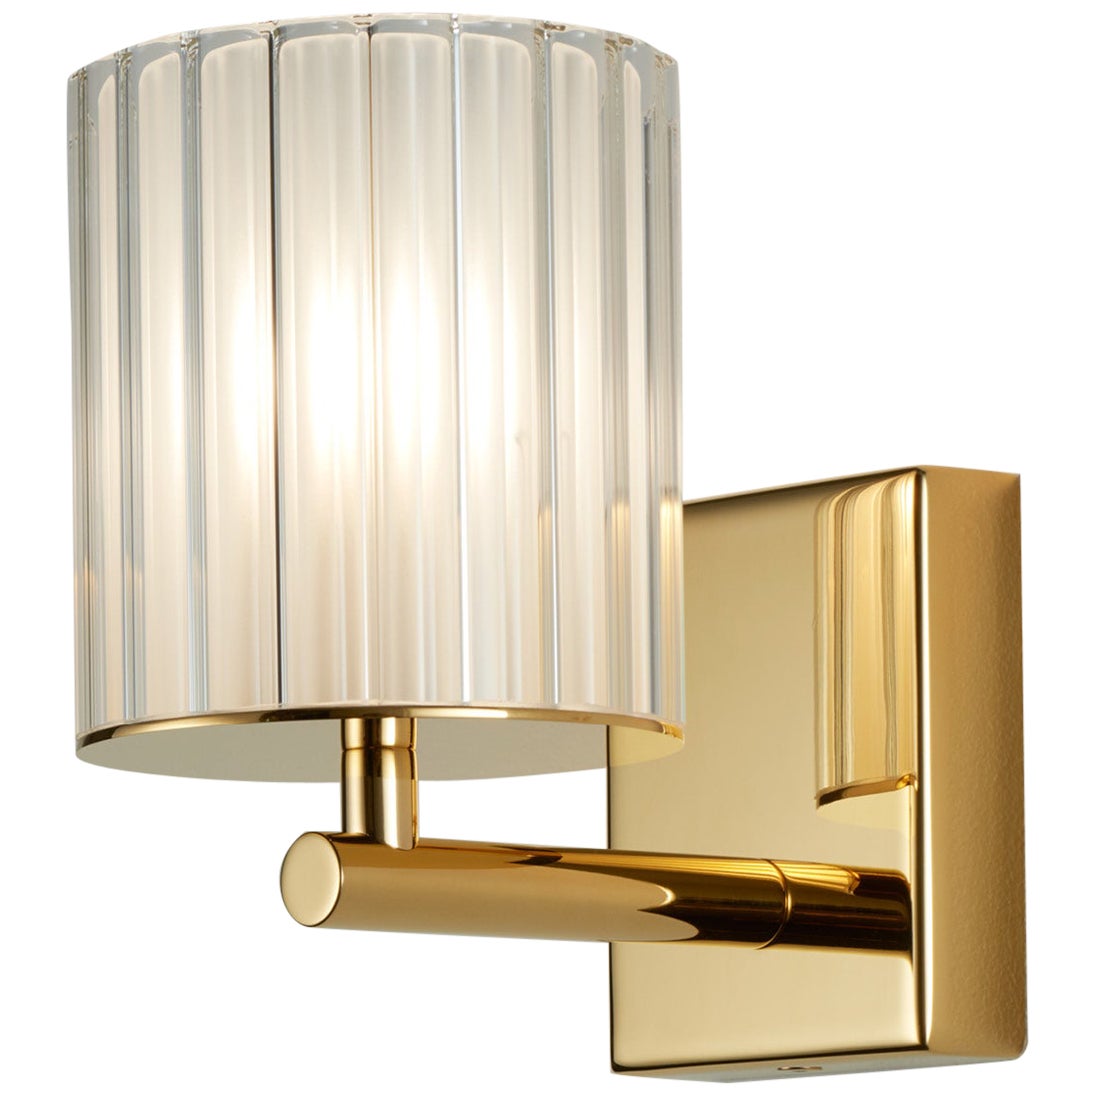 Flute Wall Light in Polished Gold with Frosted Glass Diffuser, UL Listed